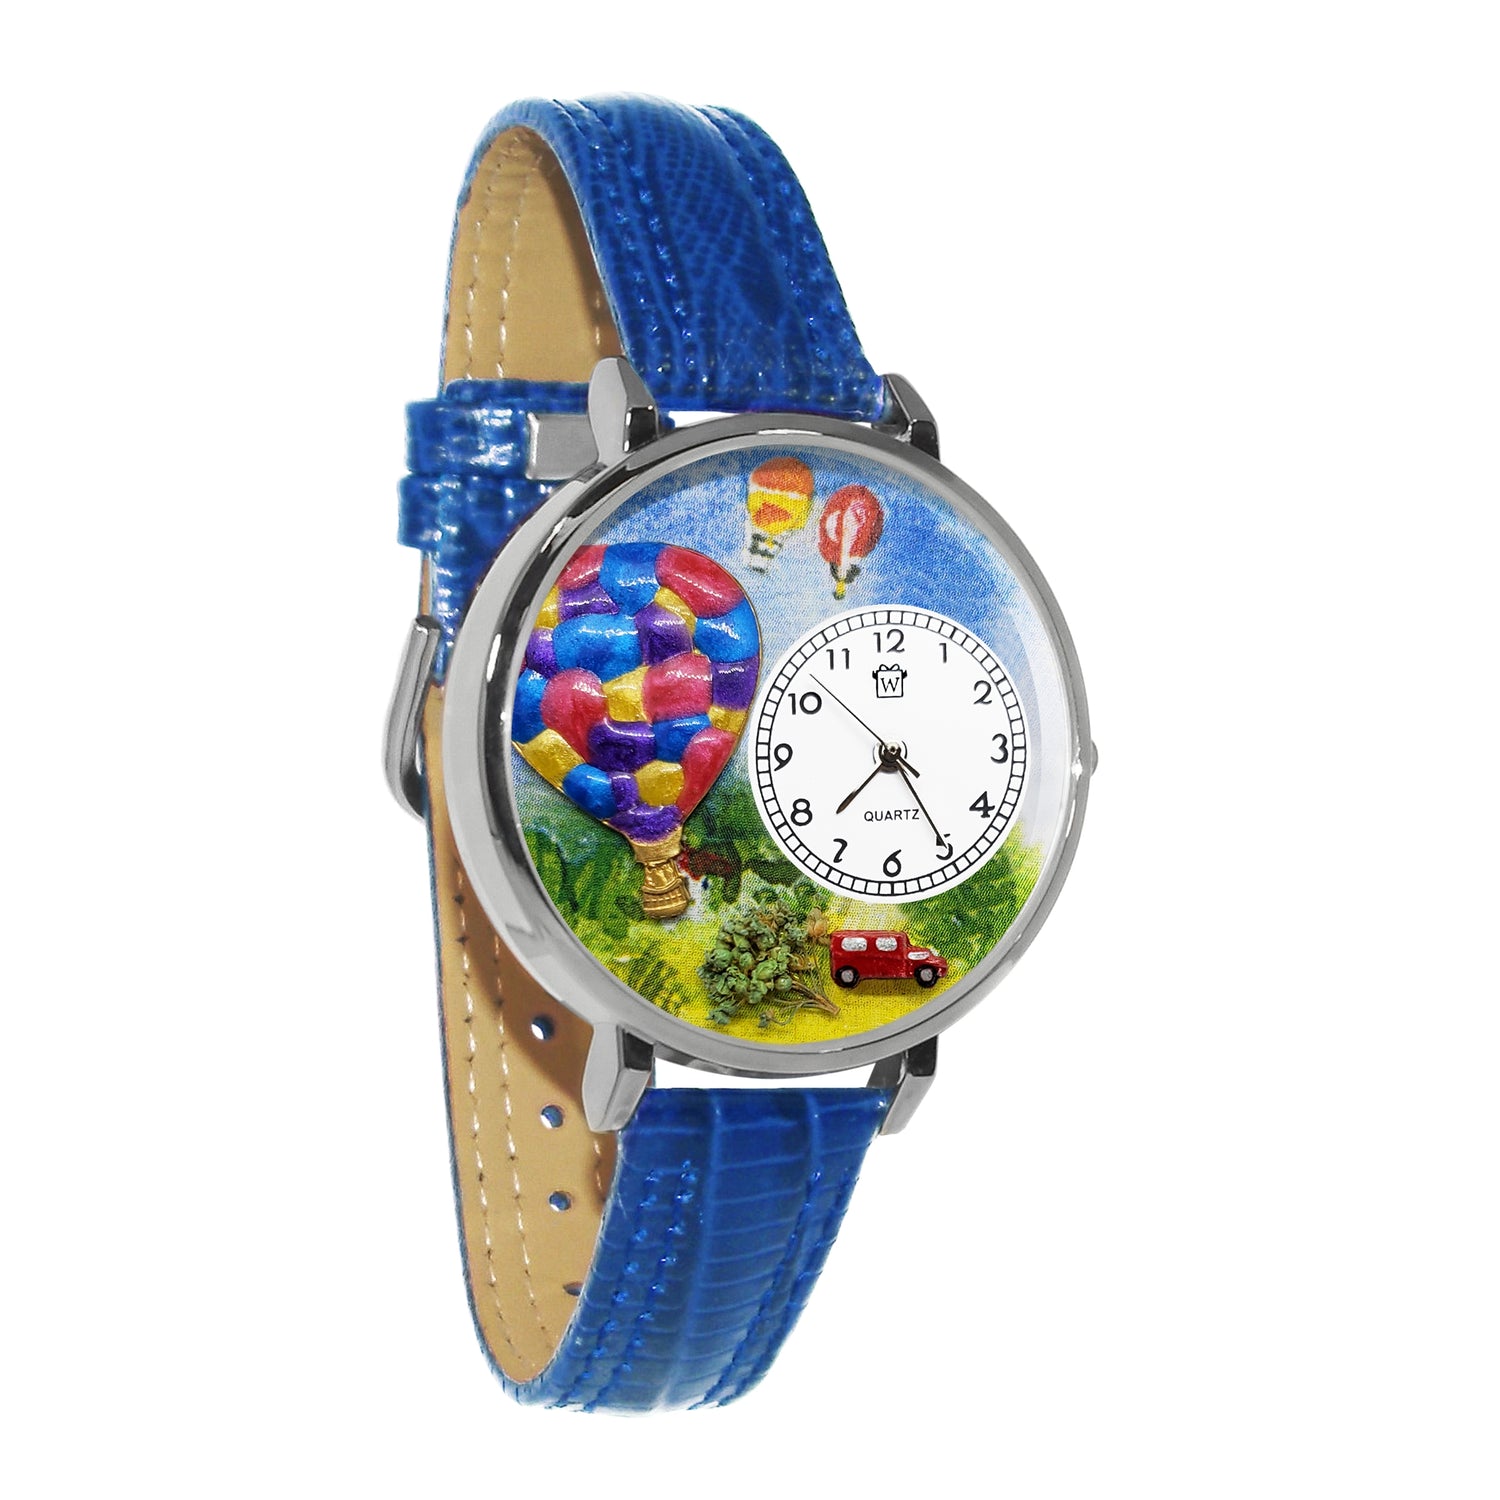 Whimsical Gifts | Hot Air Balloons 3D Watch Large Style | Handmade in USA | Hobbies & Special Interests | Outdoor Hobbies | Novelty Unique Fun Miniatures Gift | Silver Finish Royal Blue Leather Watch Band